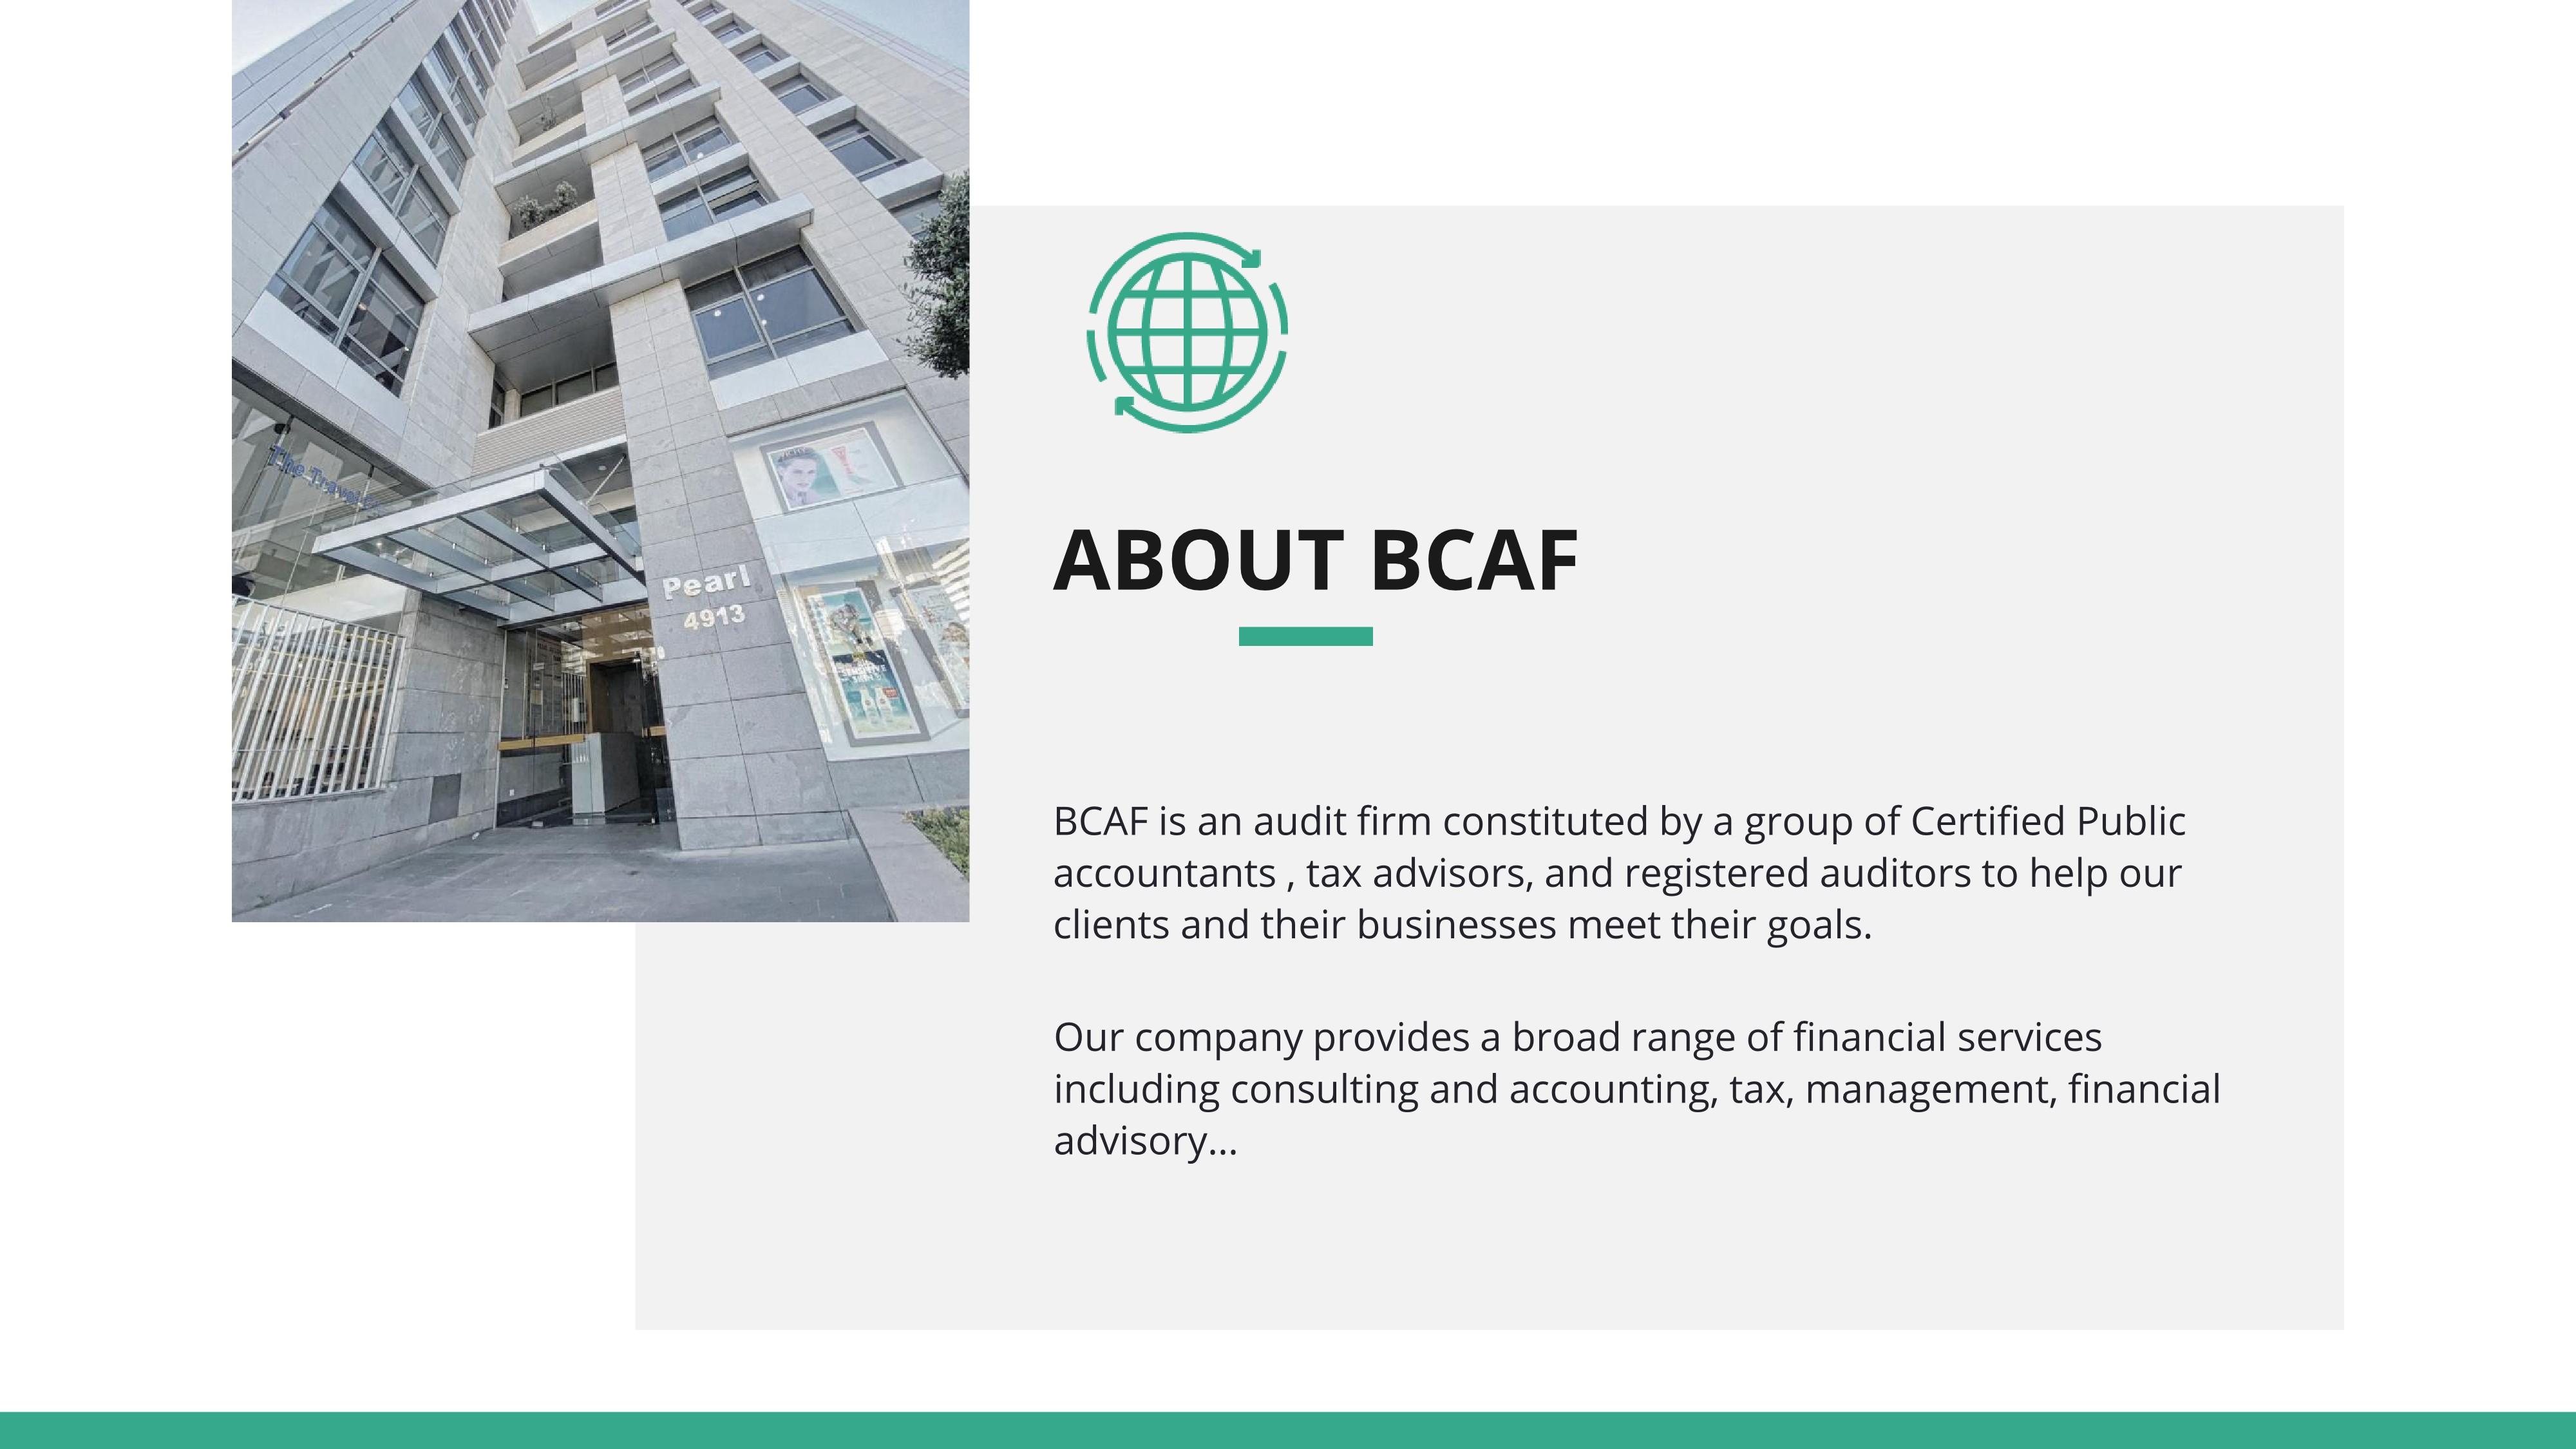 About BCAF